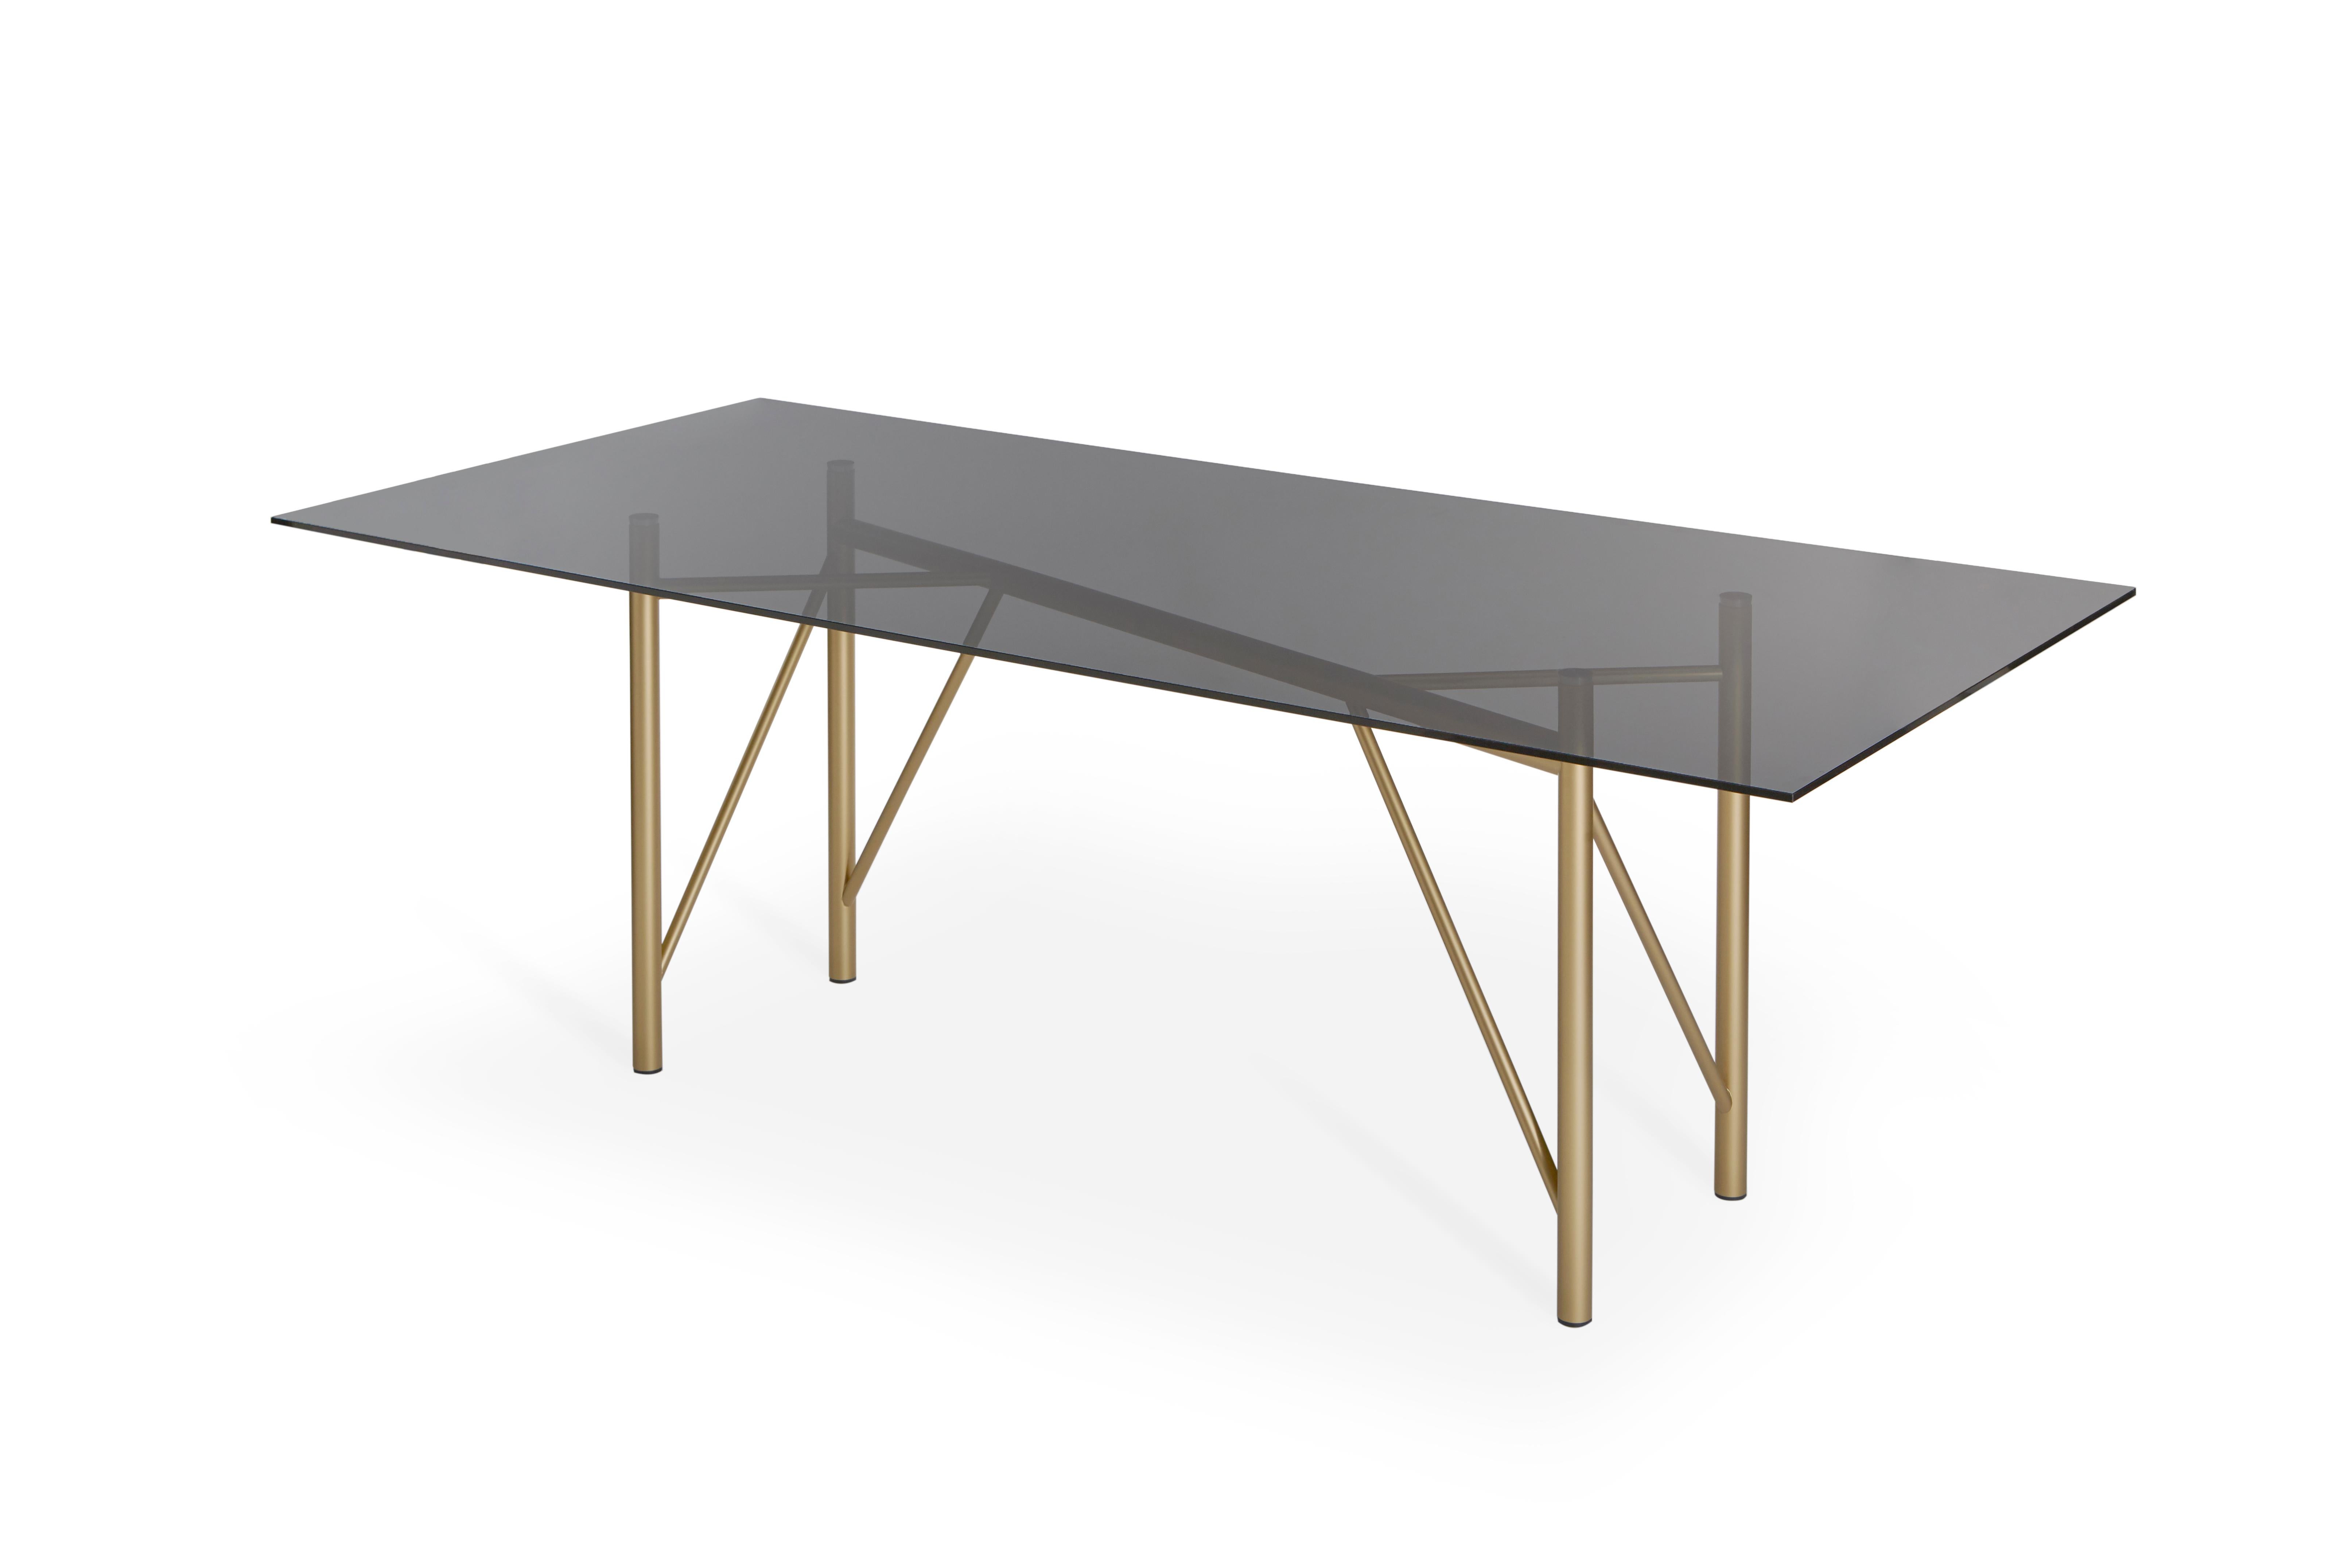 Tubolar table by Mentemano
Dimensions: W200 x D 100 x H 75 cm
Materials: Painted matt brass, Smoked grey top

The project is based on lightness and attention to details. Volumes and lines are the result of technical and aesthetic process